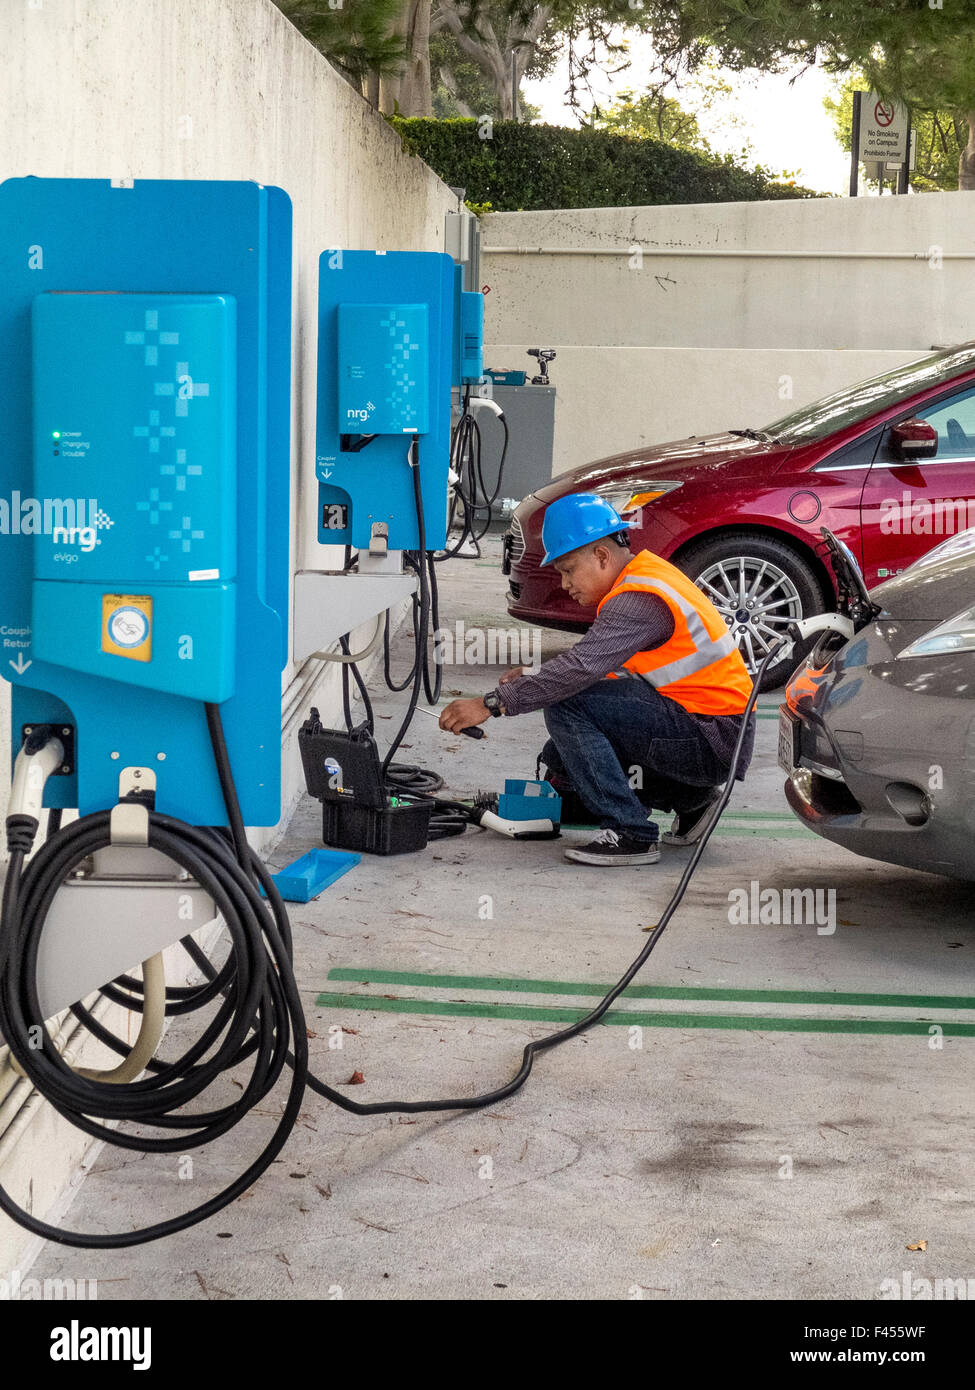 Repair technician maintains an electric car charging station at an Irvine, CA, hospital parking lot. Note electric car being charged at right. Stock Photo